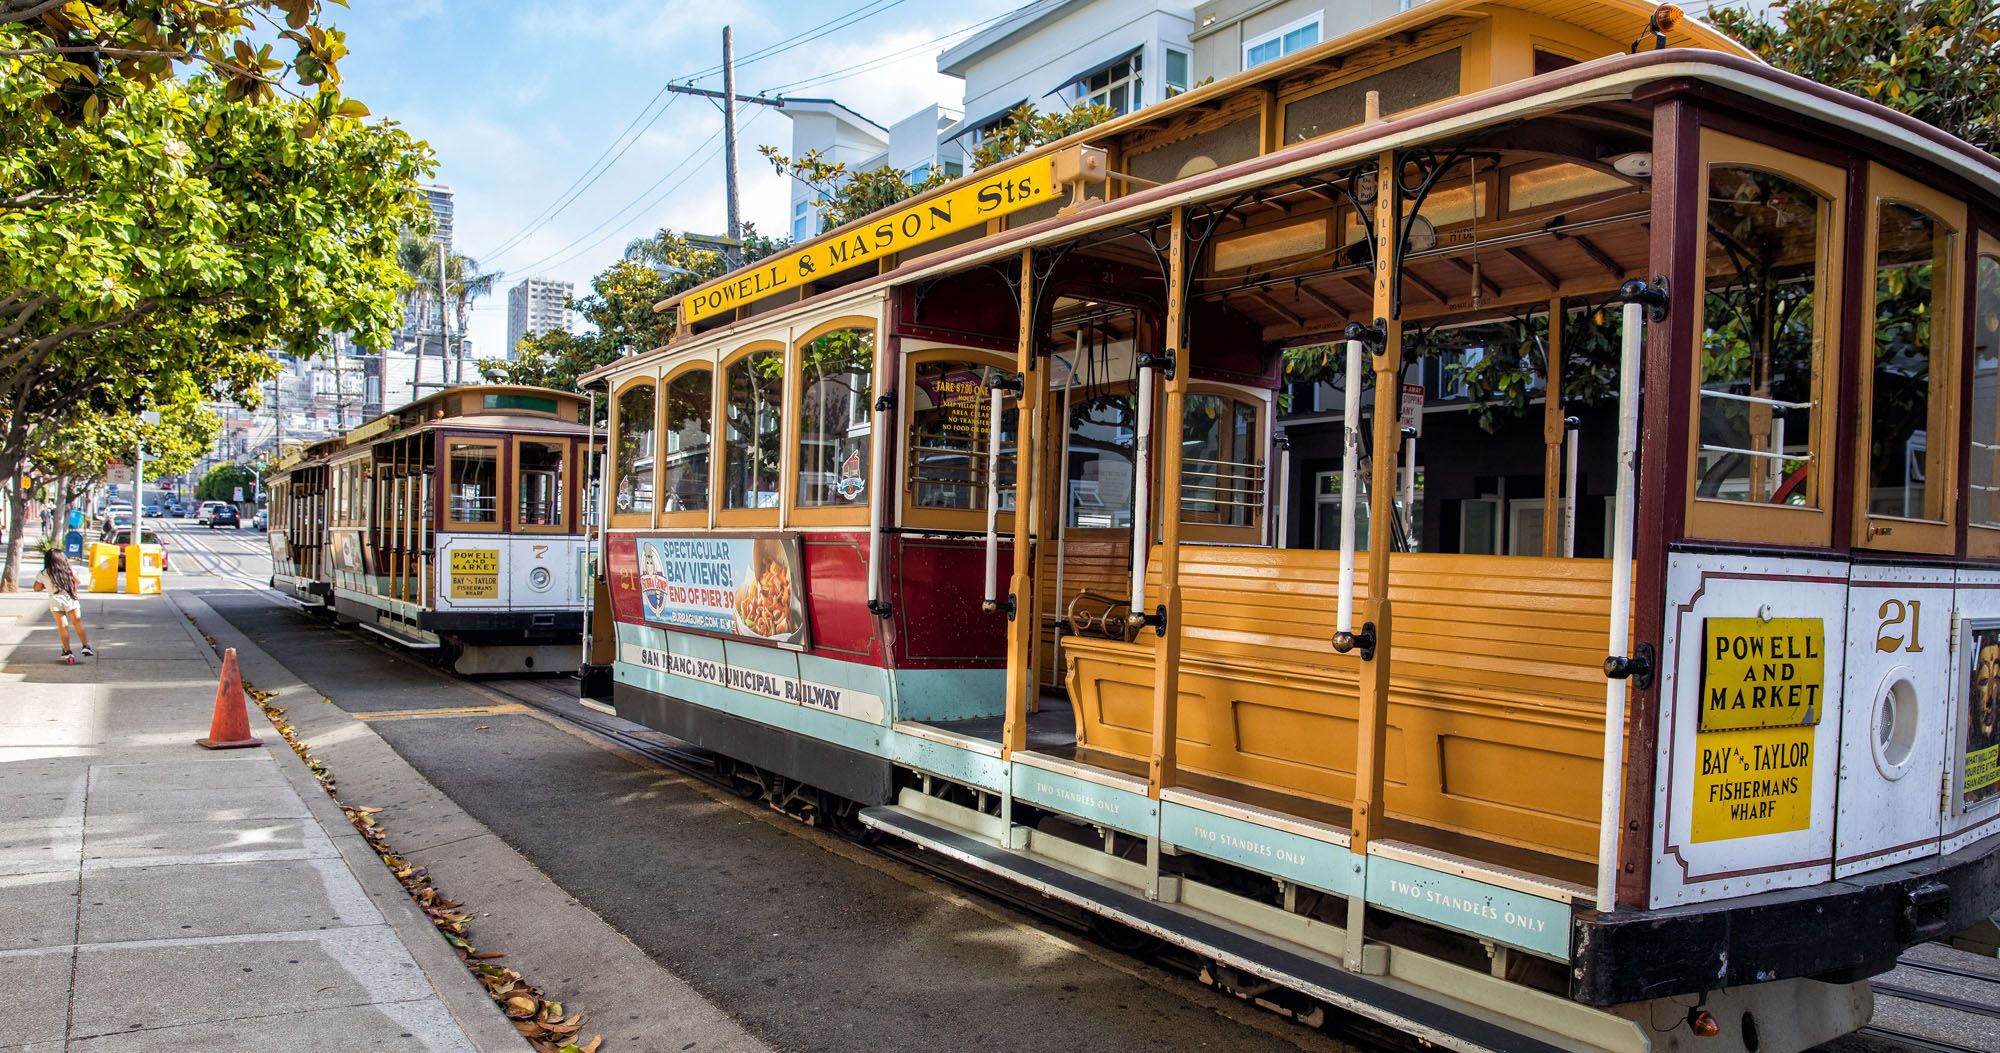 Featured image for “25 Best Things to Do in San Francisco”